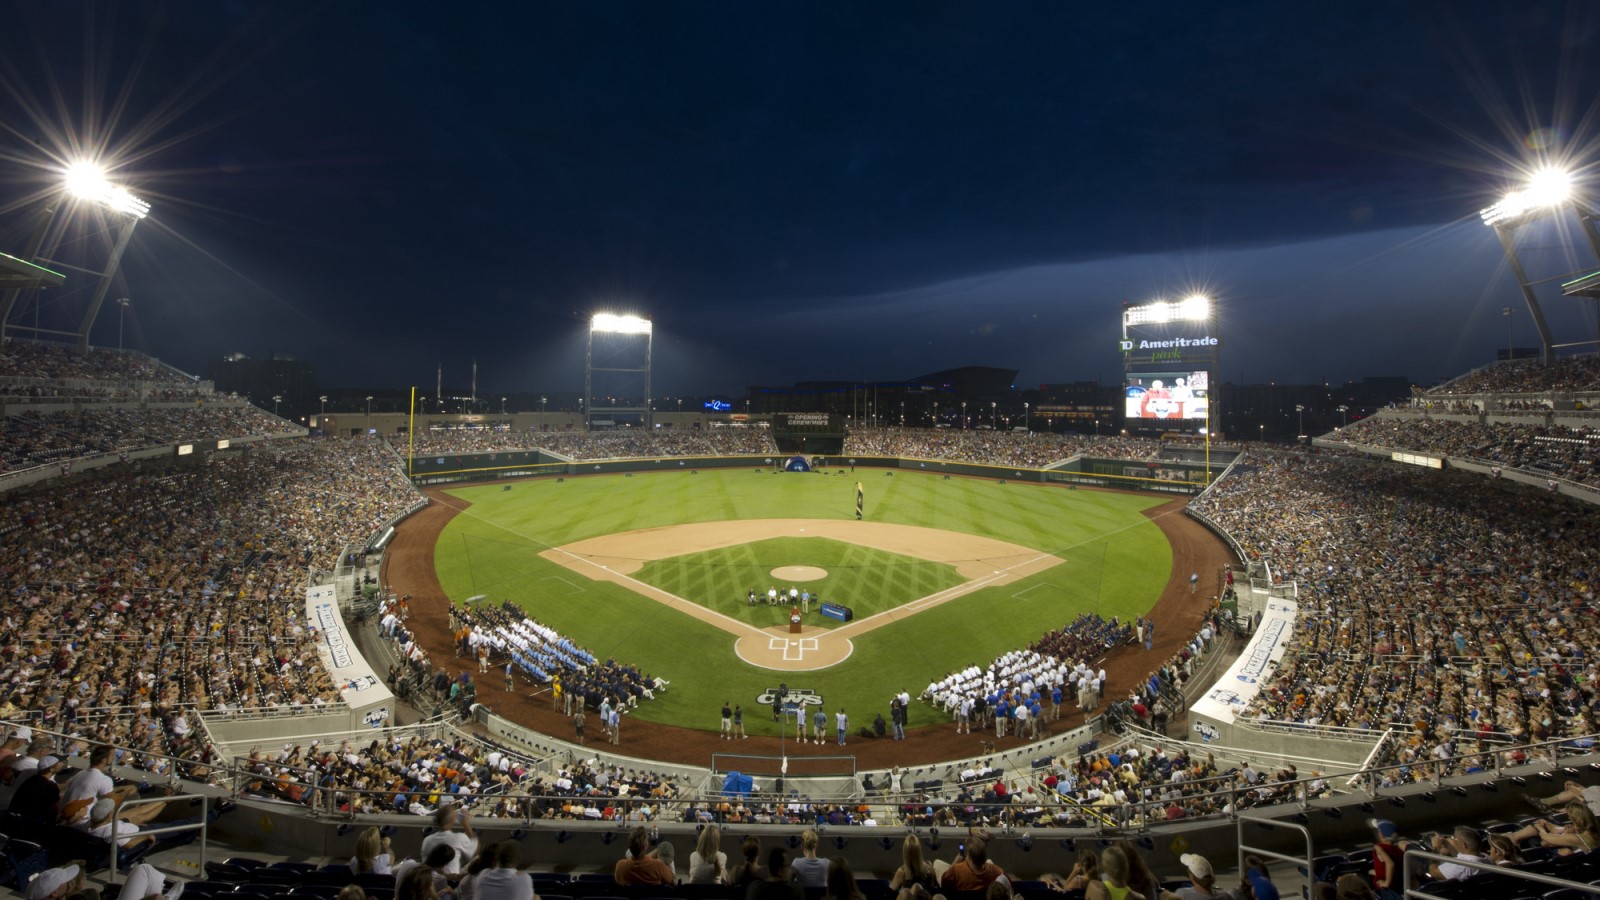 How To Watch College World Series 2019 Online Without Cable Anywhere